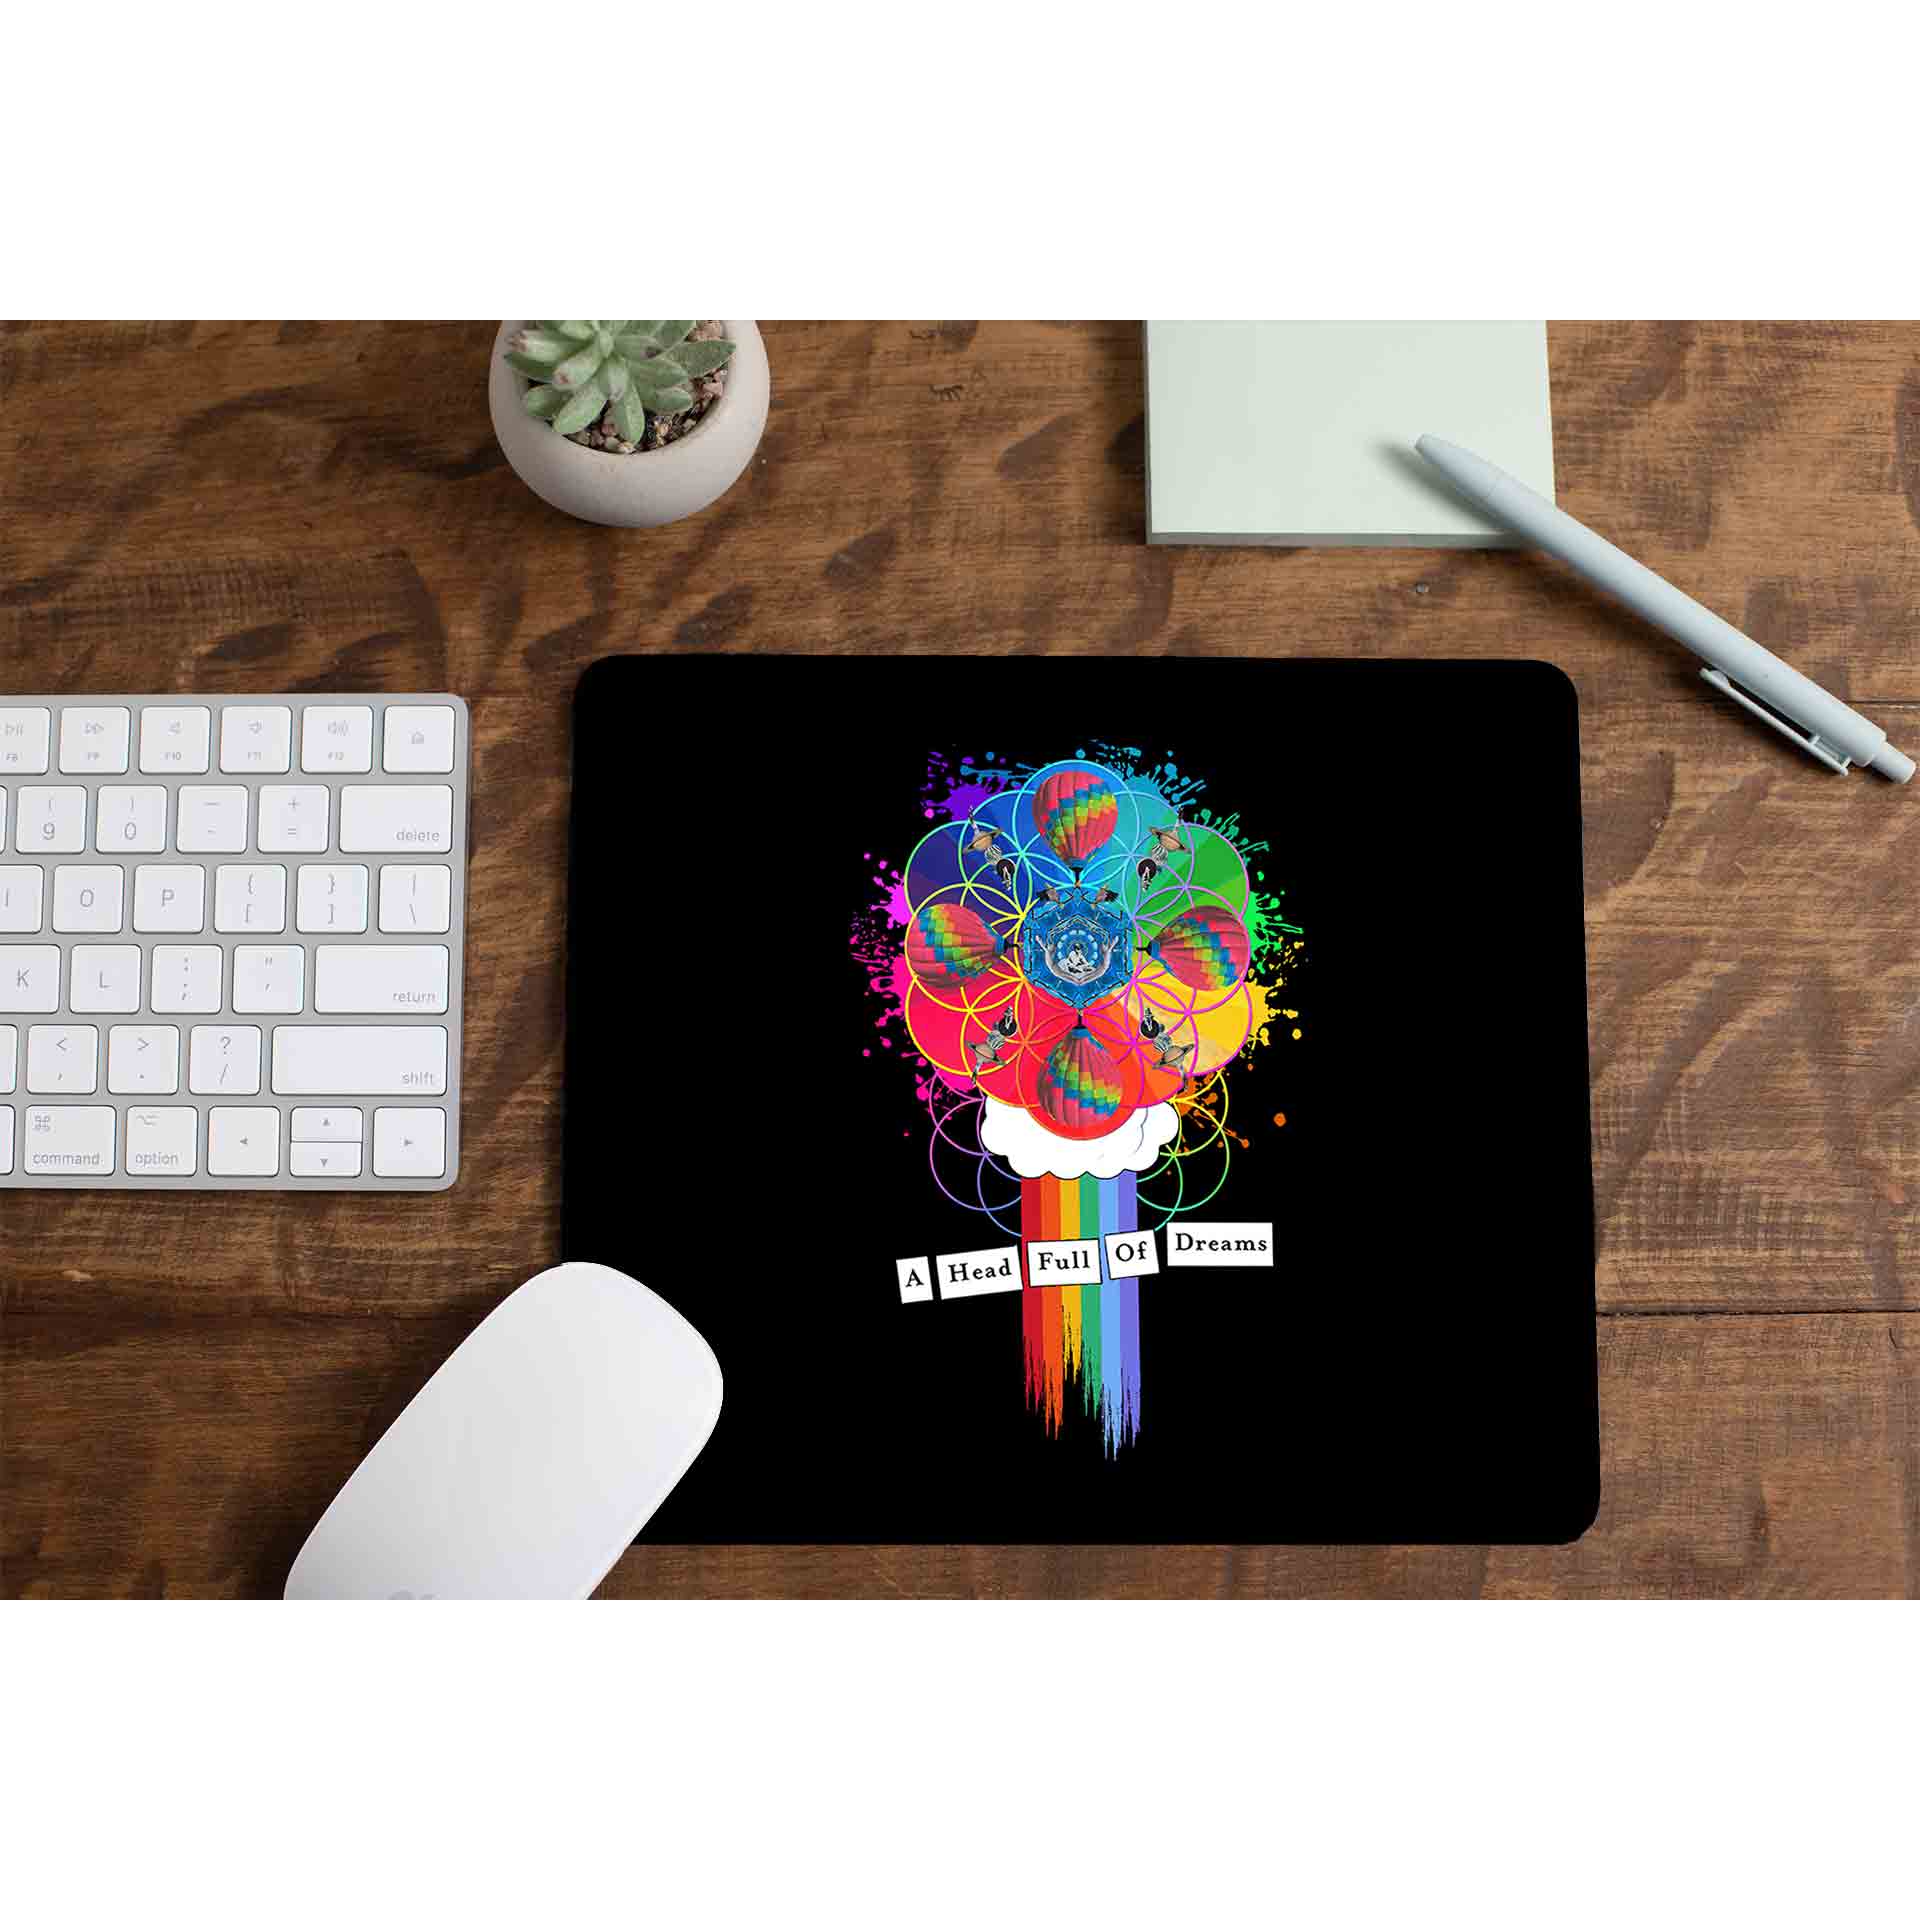 coldplay a head full of dreams mousepad logitech large anime music band buy online india the banyan tee tbt men women girls boys unisex